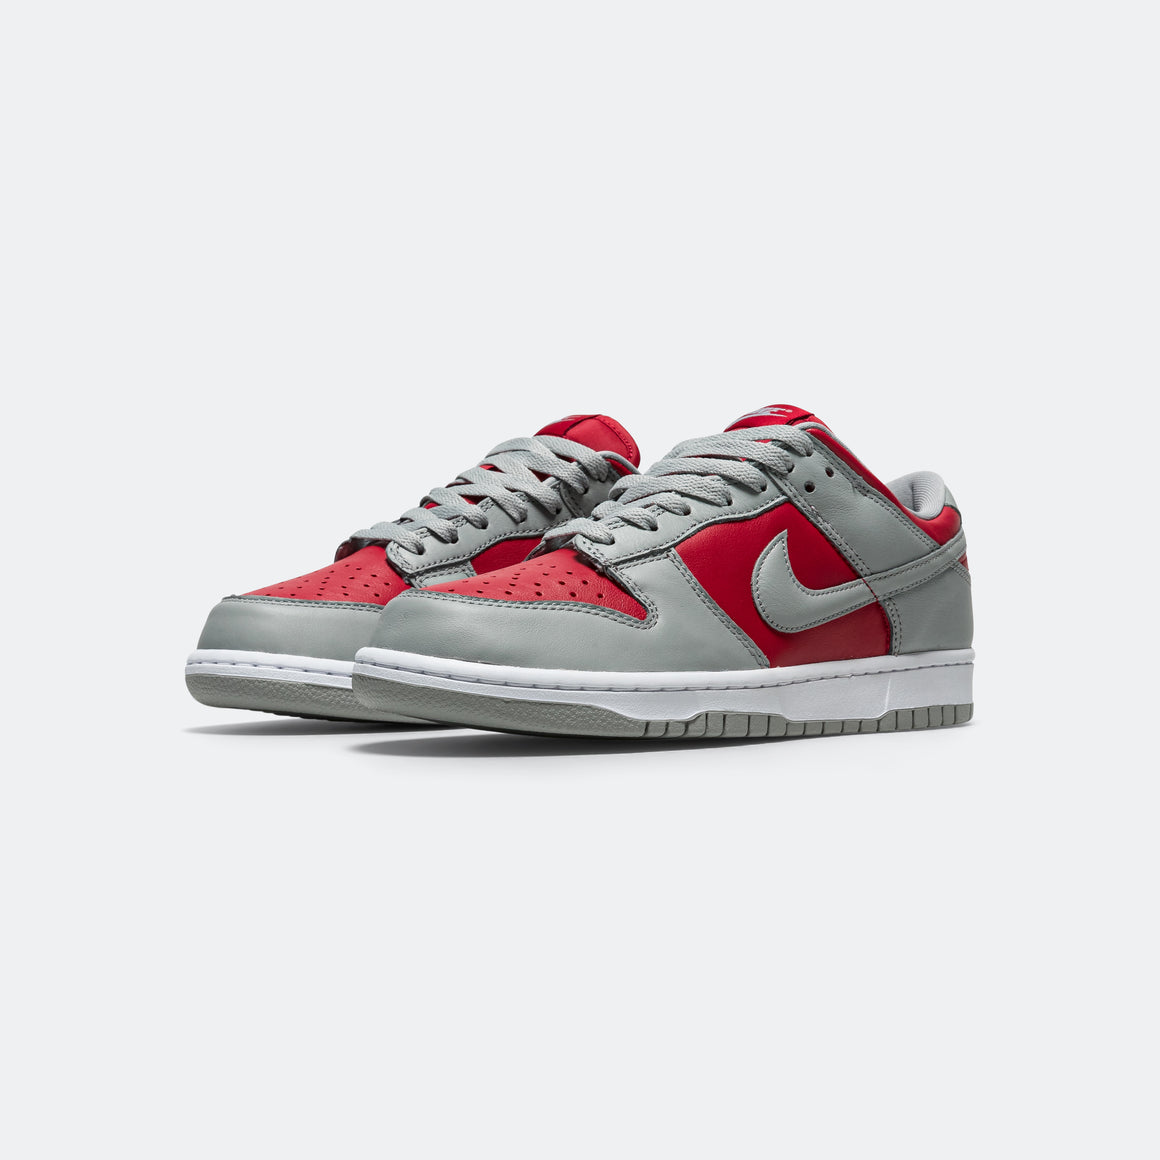 Nike - Dunk Low CO.JP - Varsity Red/Silver-White - UP THERE